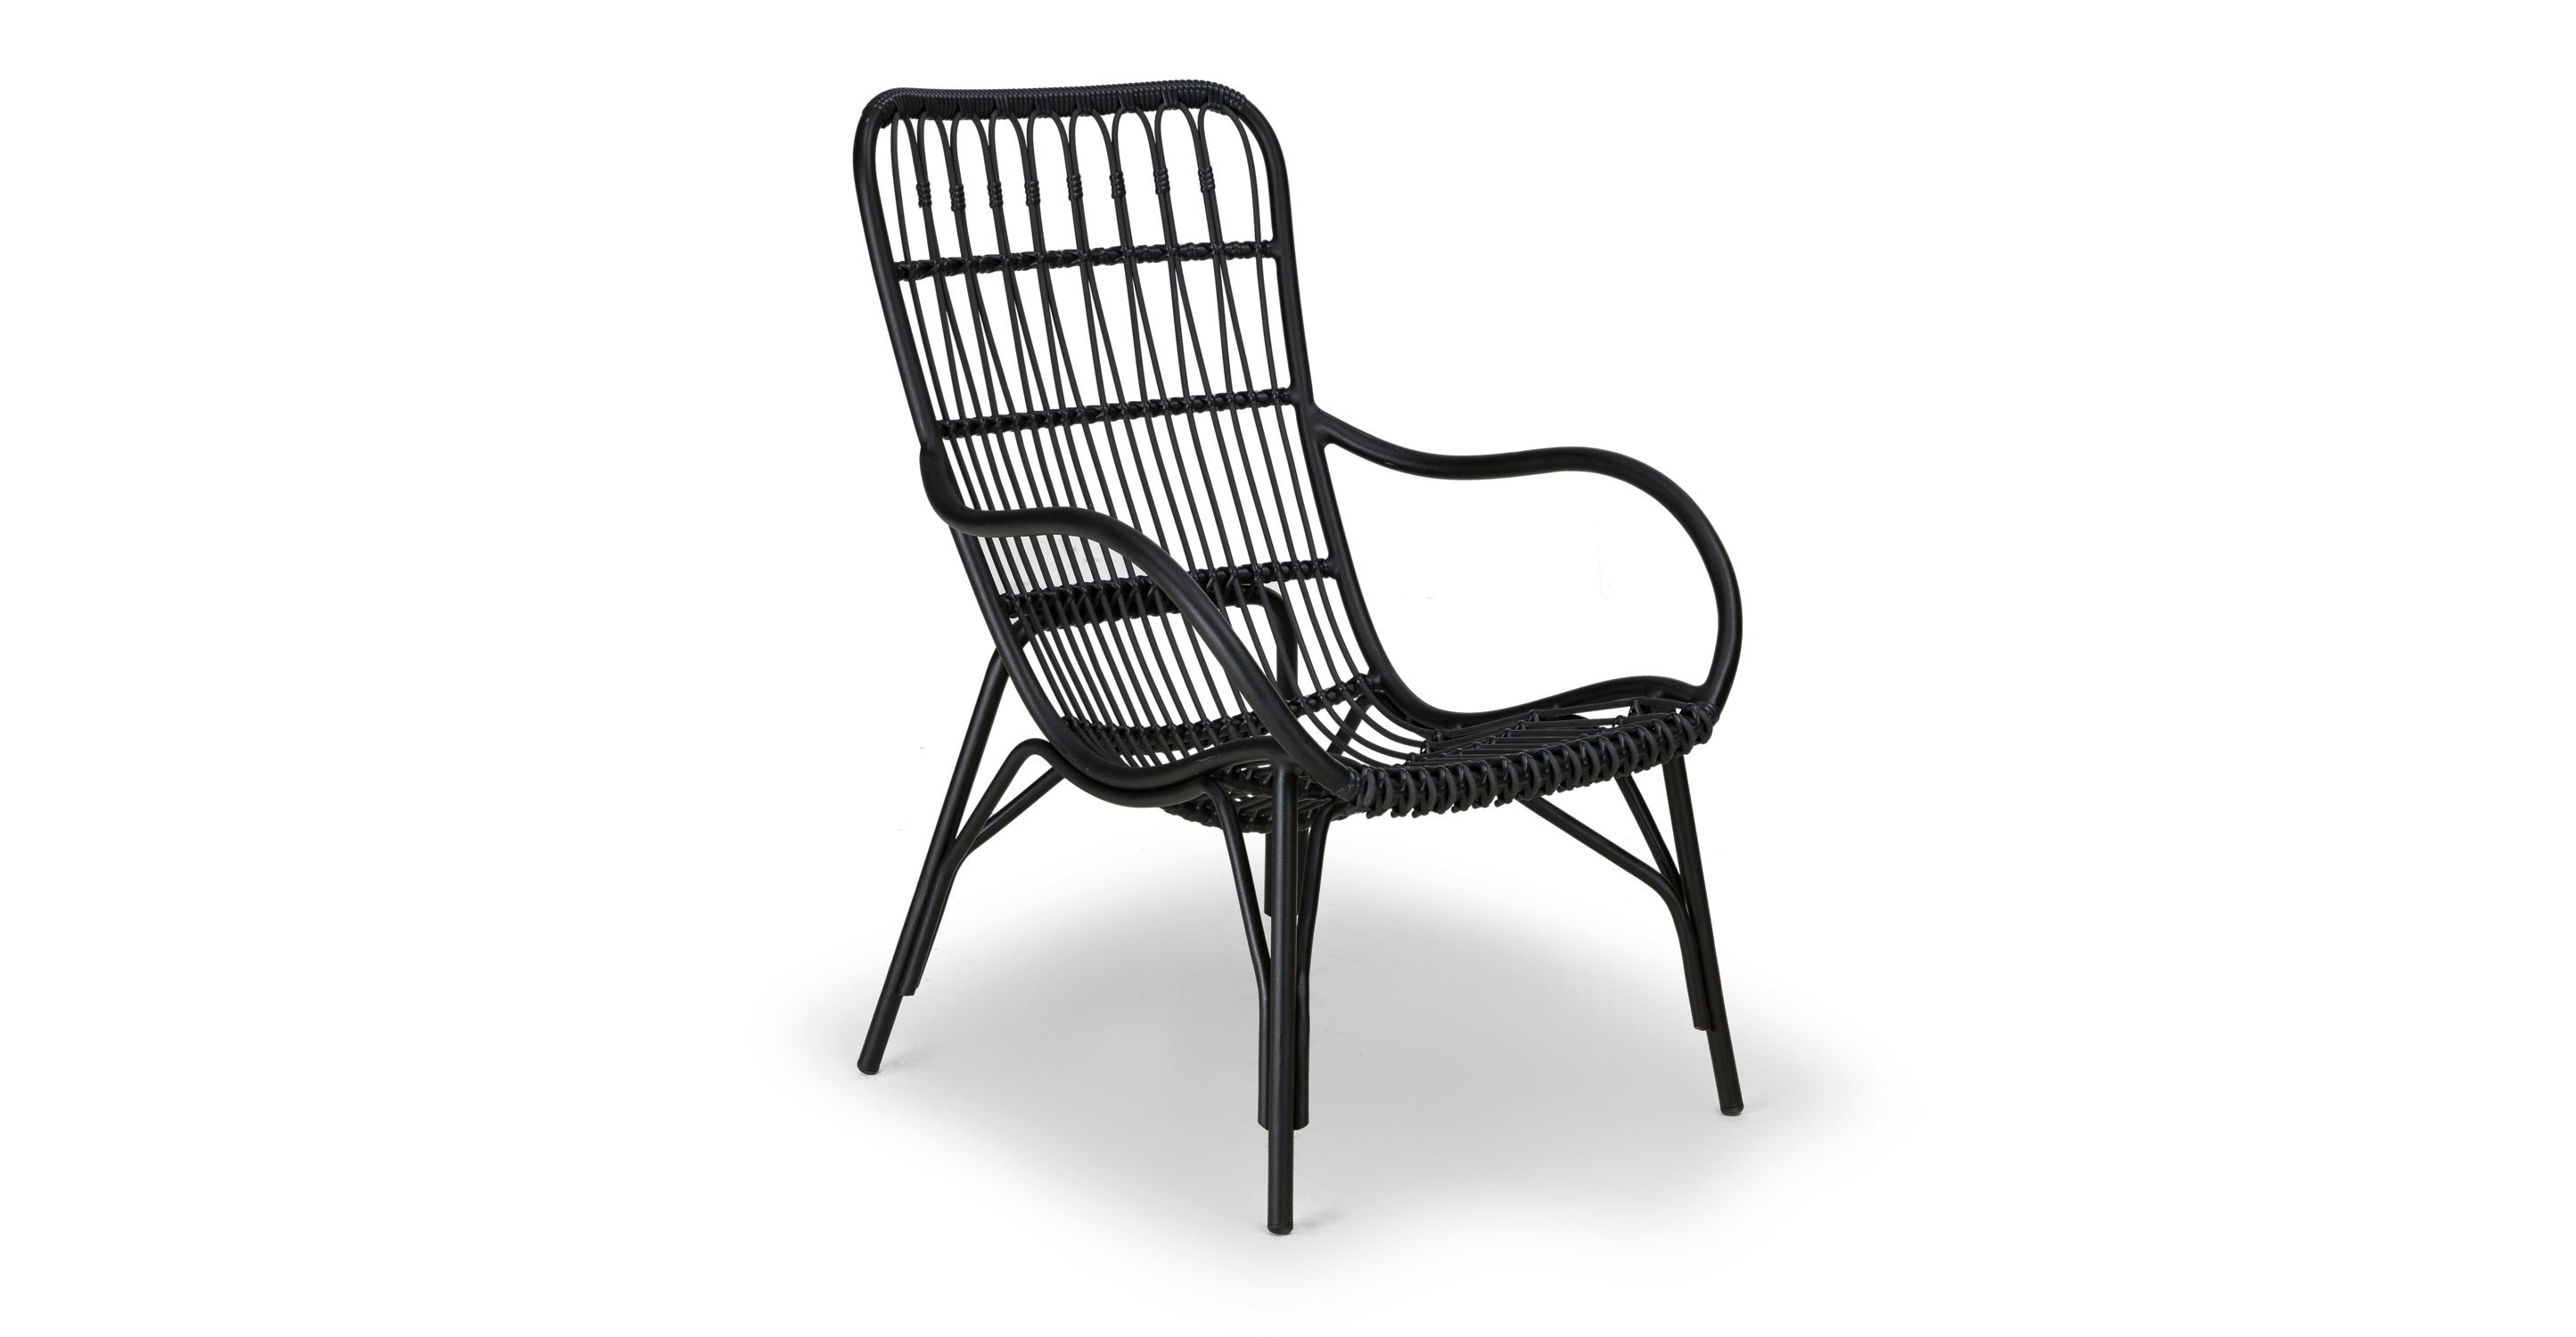 Medan Graphite Lounge Chair - Lounge Chairs - Article | Modern, Mid